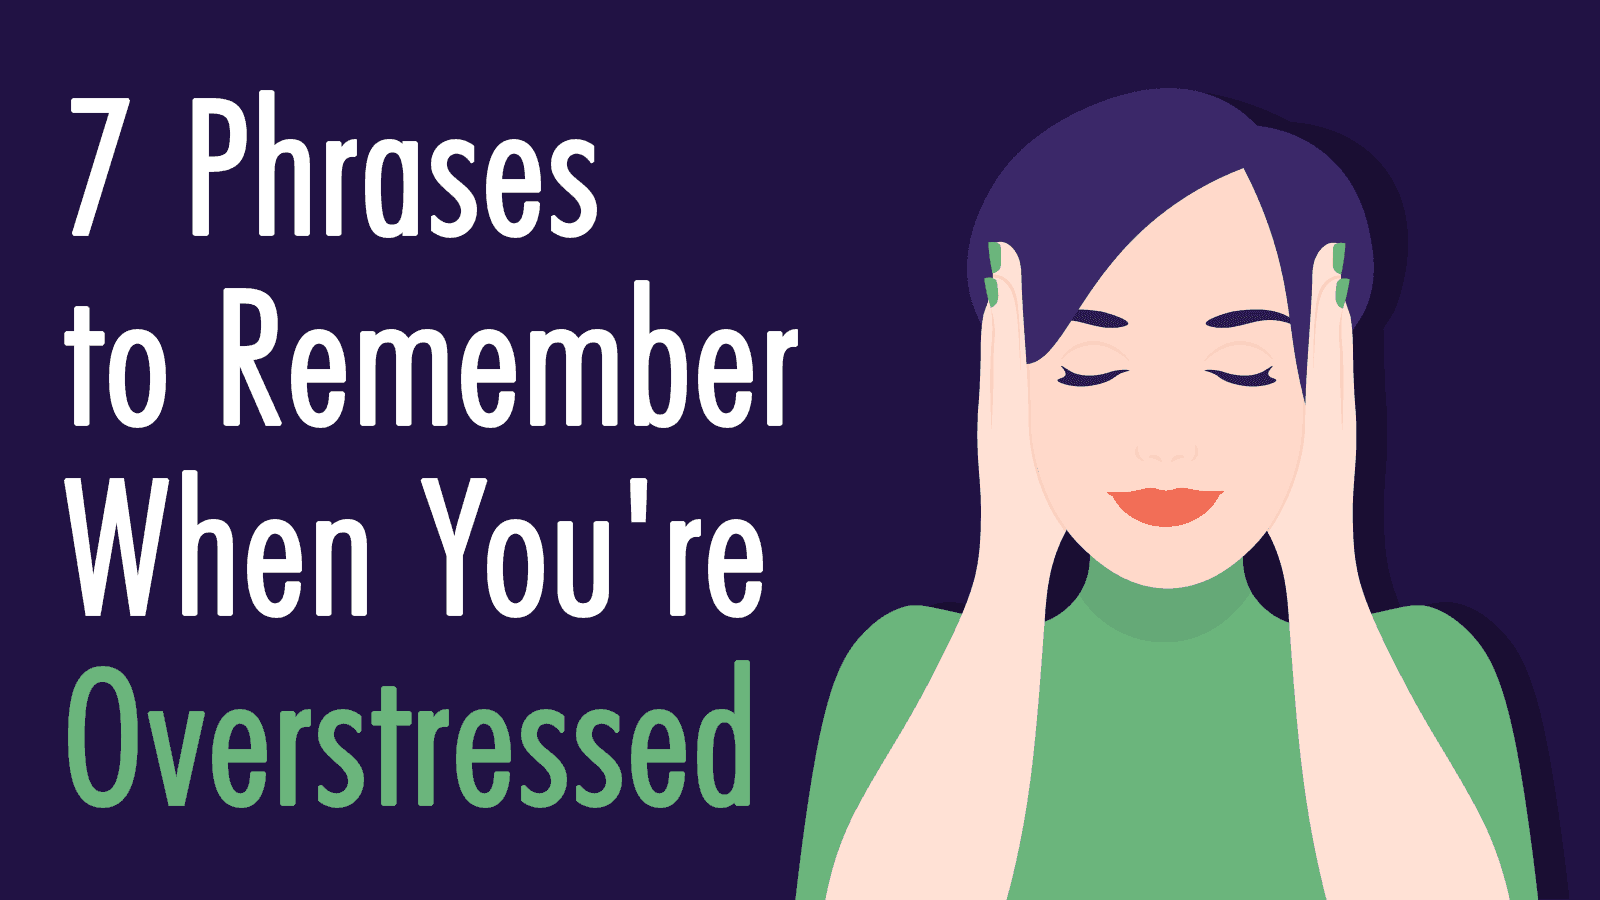 7 Phrases to Remember When You’re Overstressed